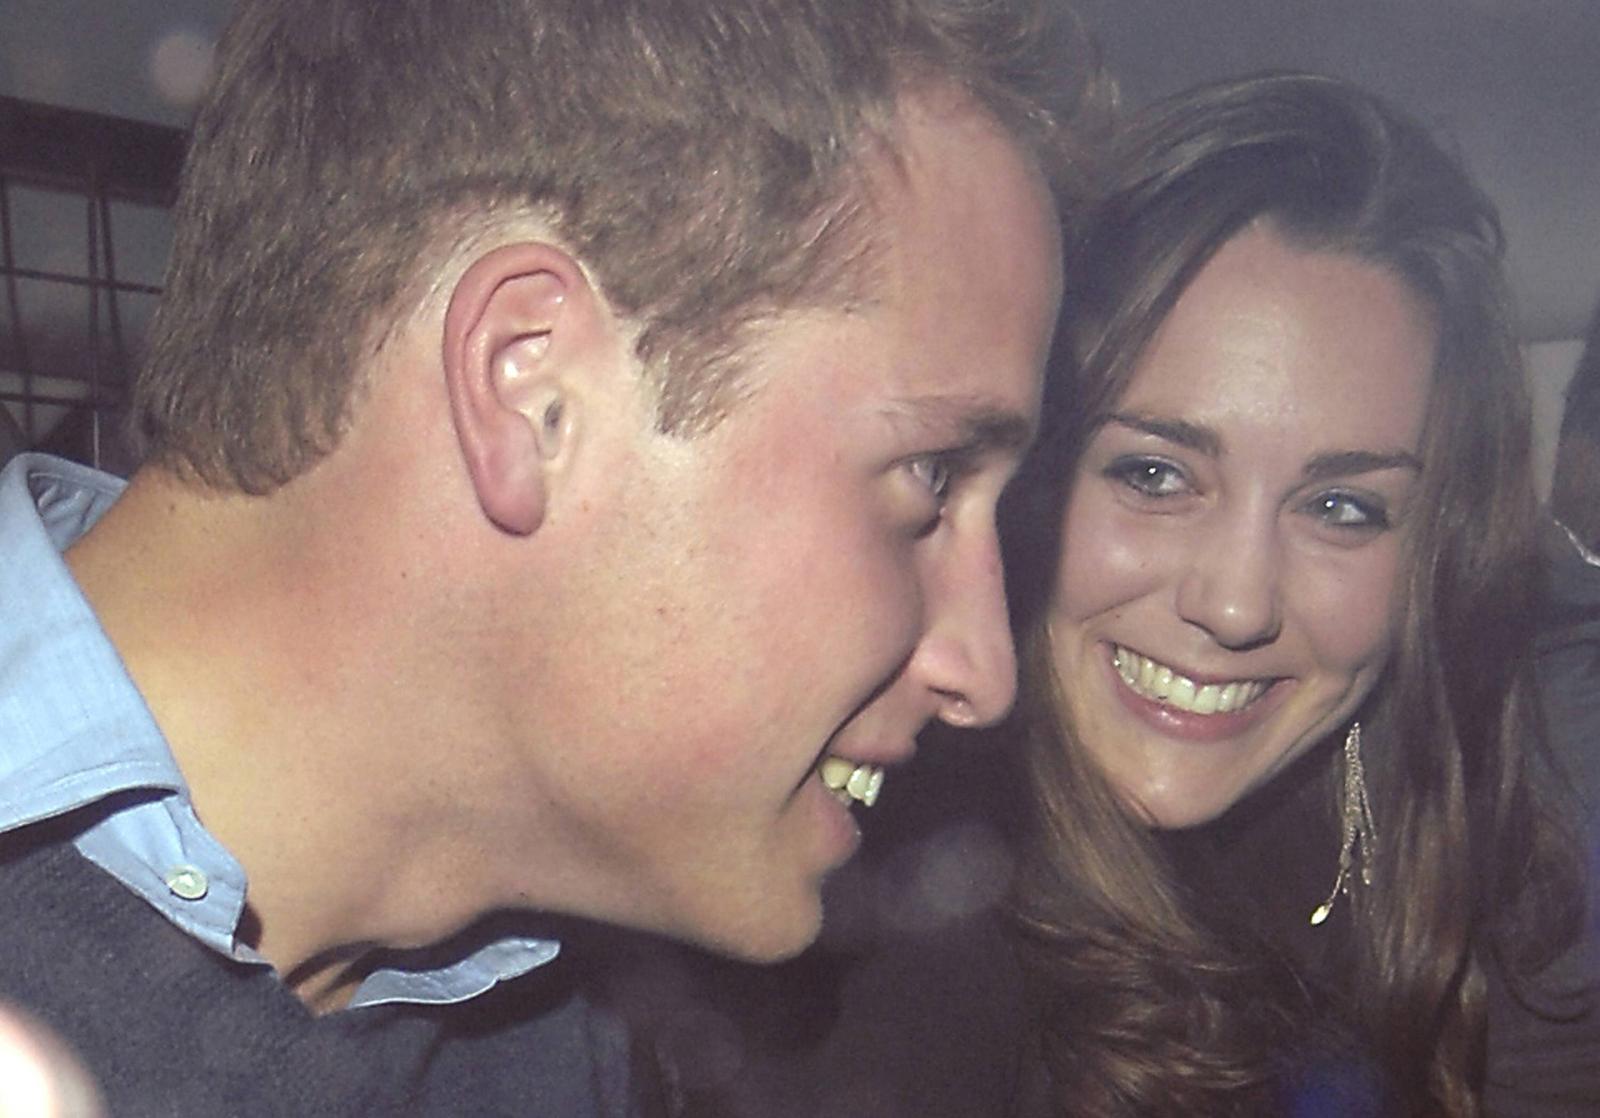 Prince William and Kate Middleton: a Royal Couple With a Rocky Past - image 1